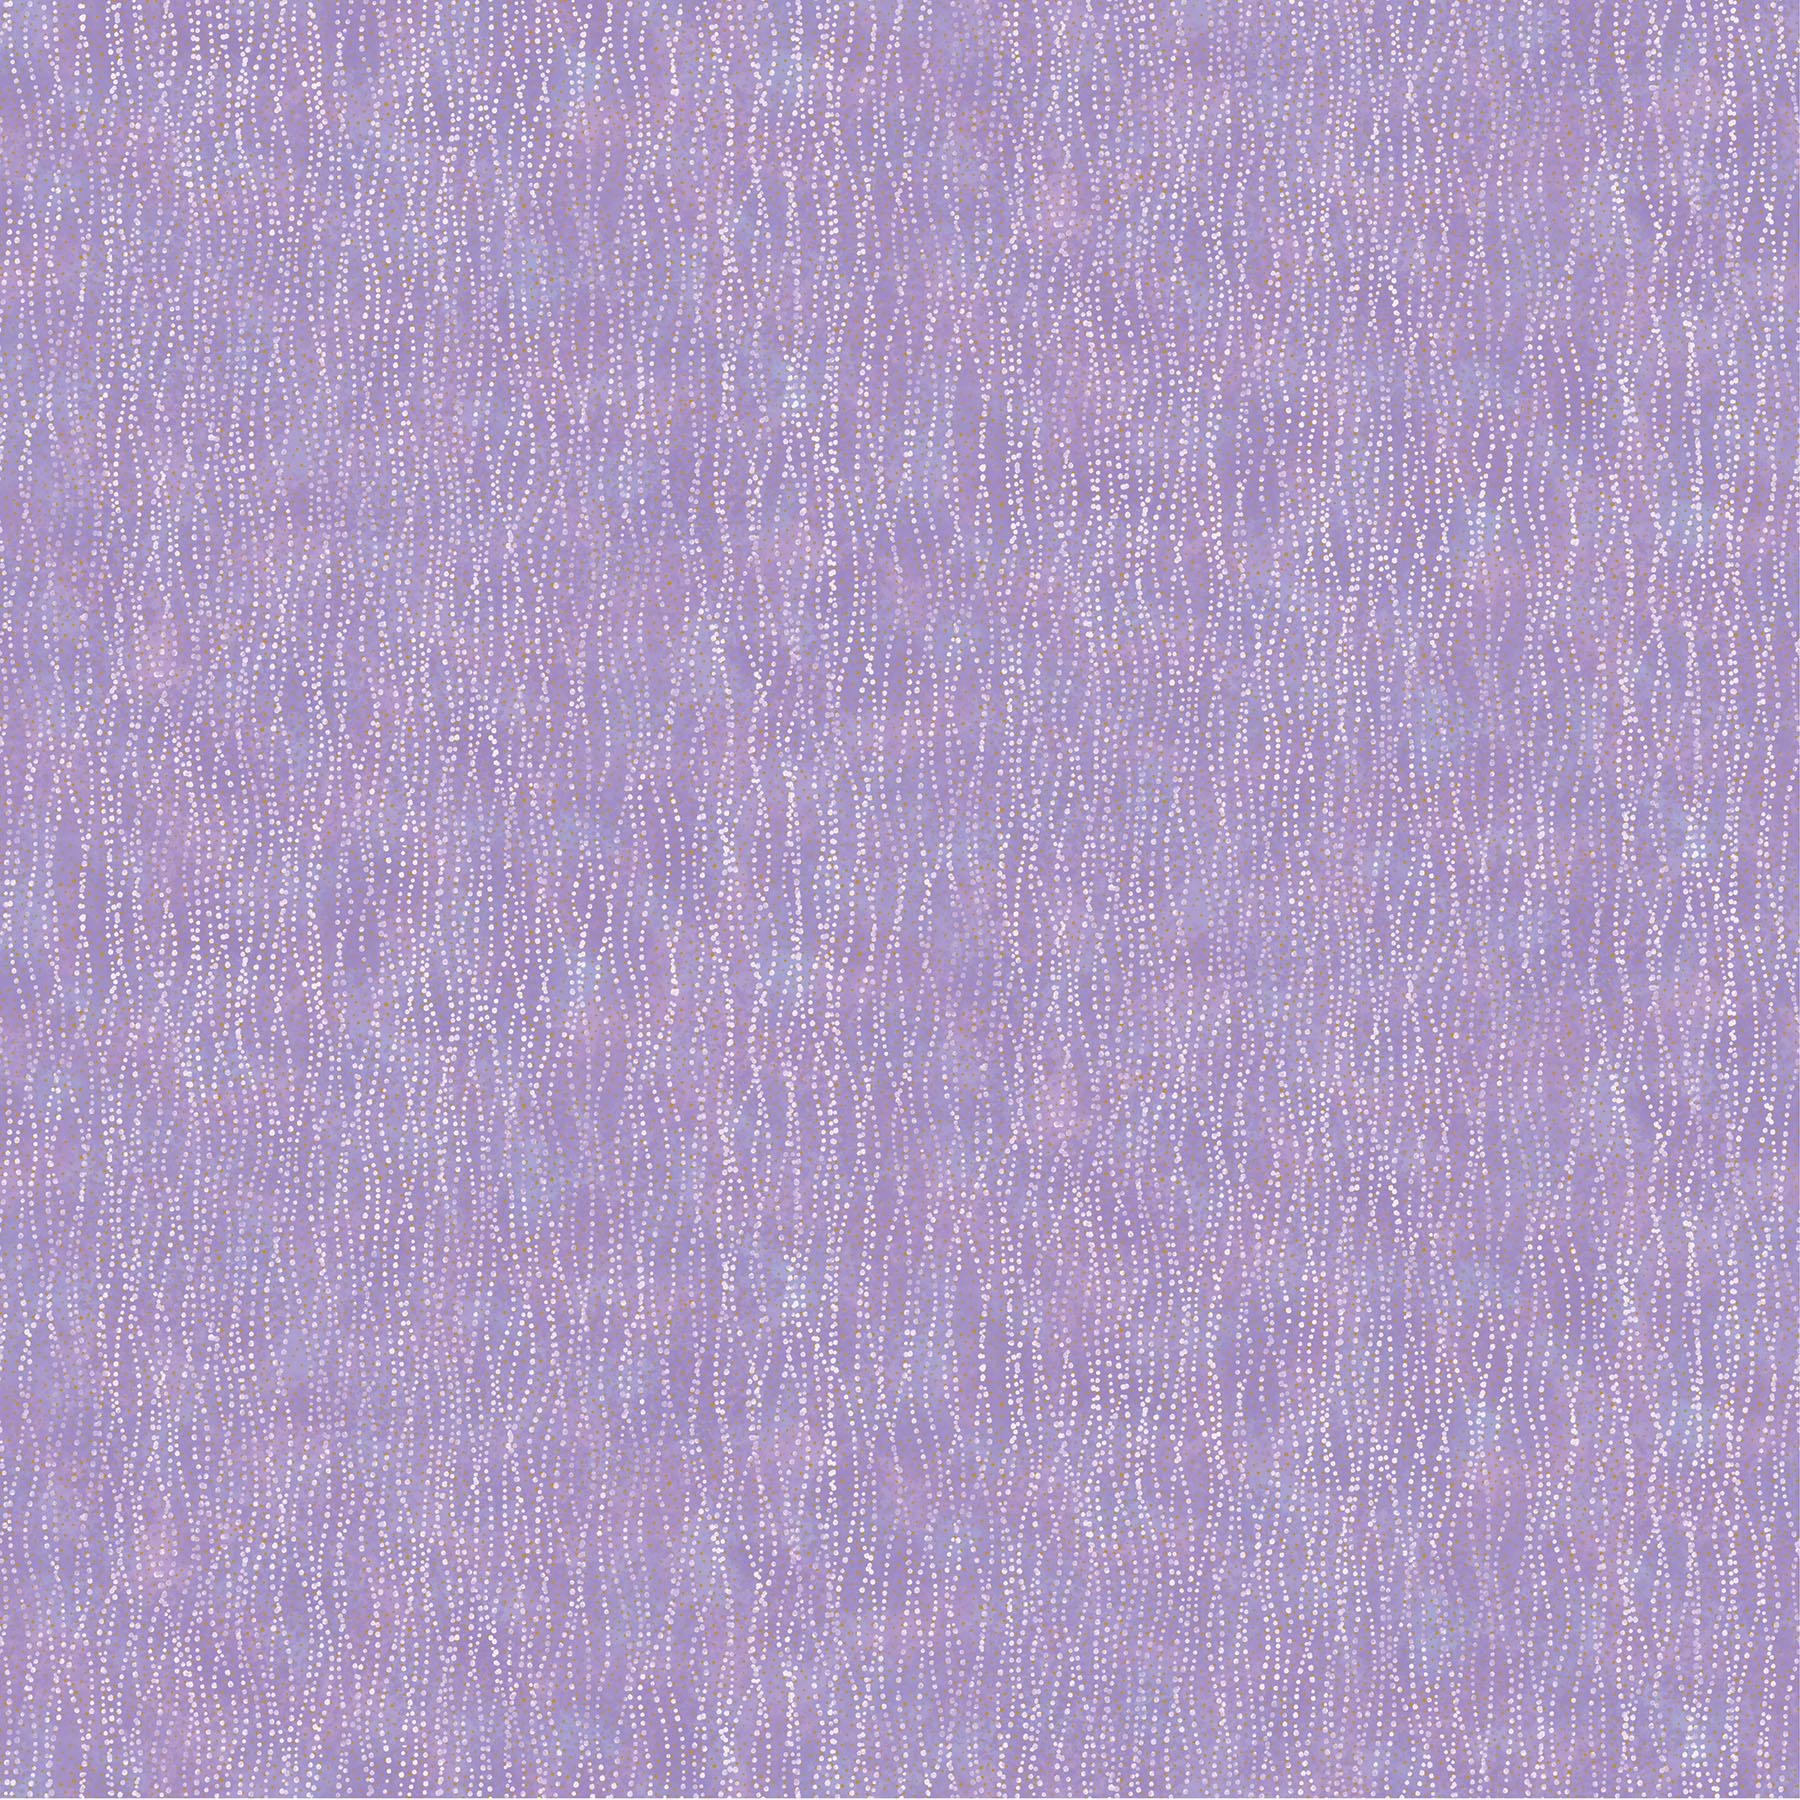 Noctural Bliss Fantasia Cotton Fabric Dotted Wave by Northcott 22963M-82